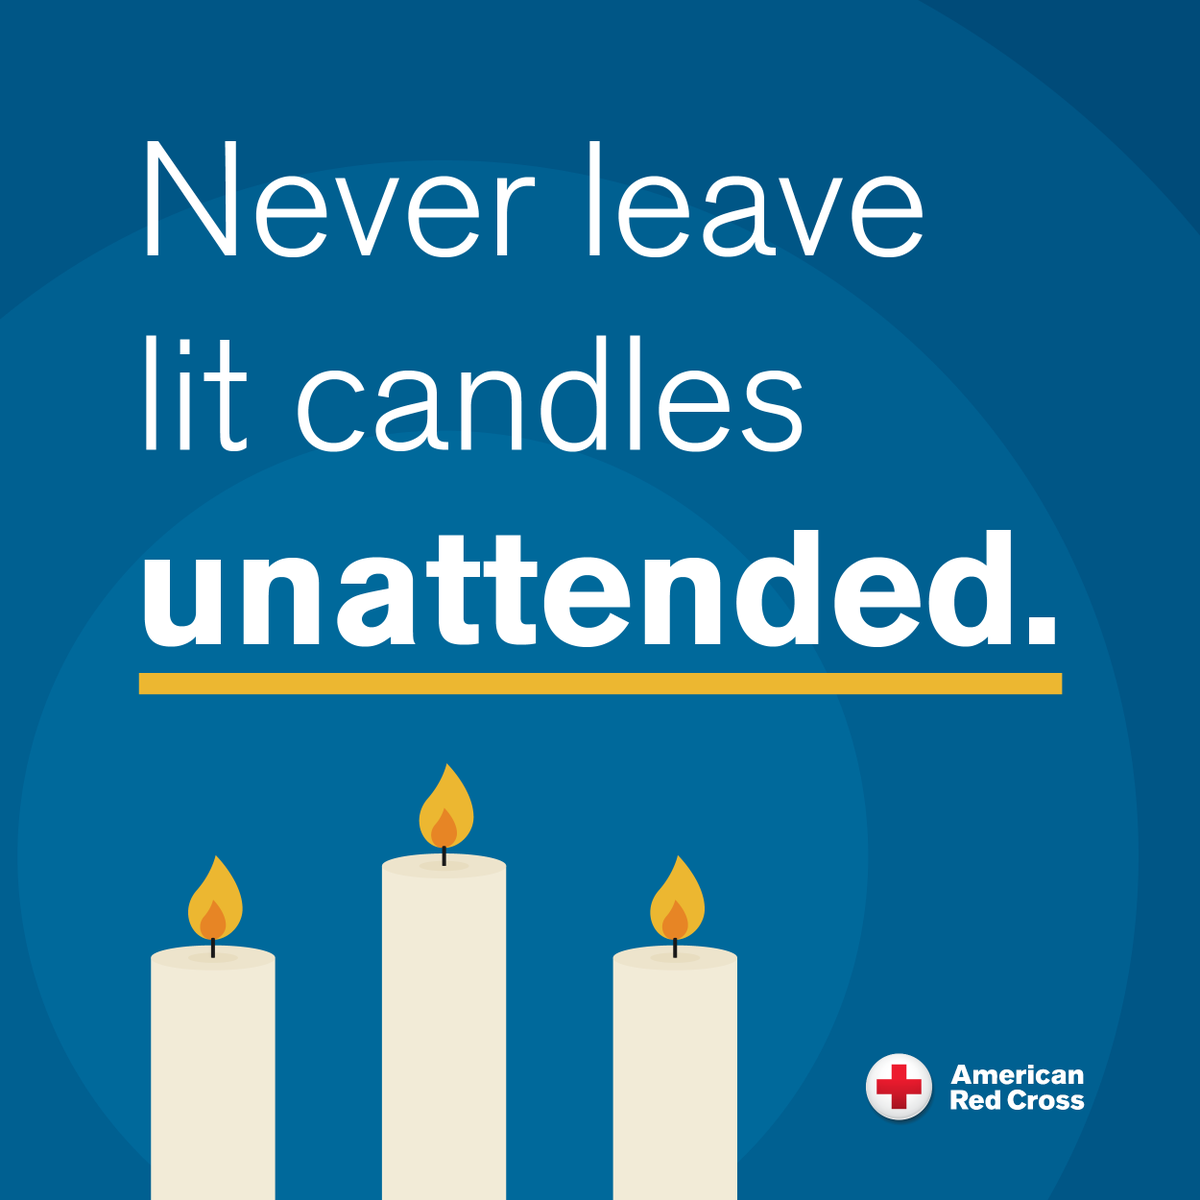 Protect your home and loved ones this holiday season by never leaving candles unattended. Stay safe and spread the warmth responsibly! ✨🕯️